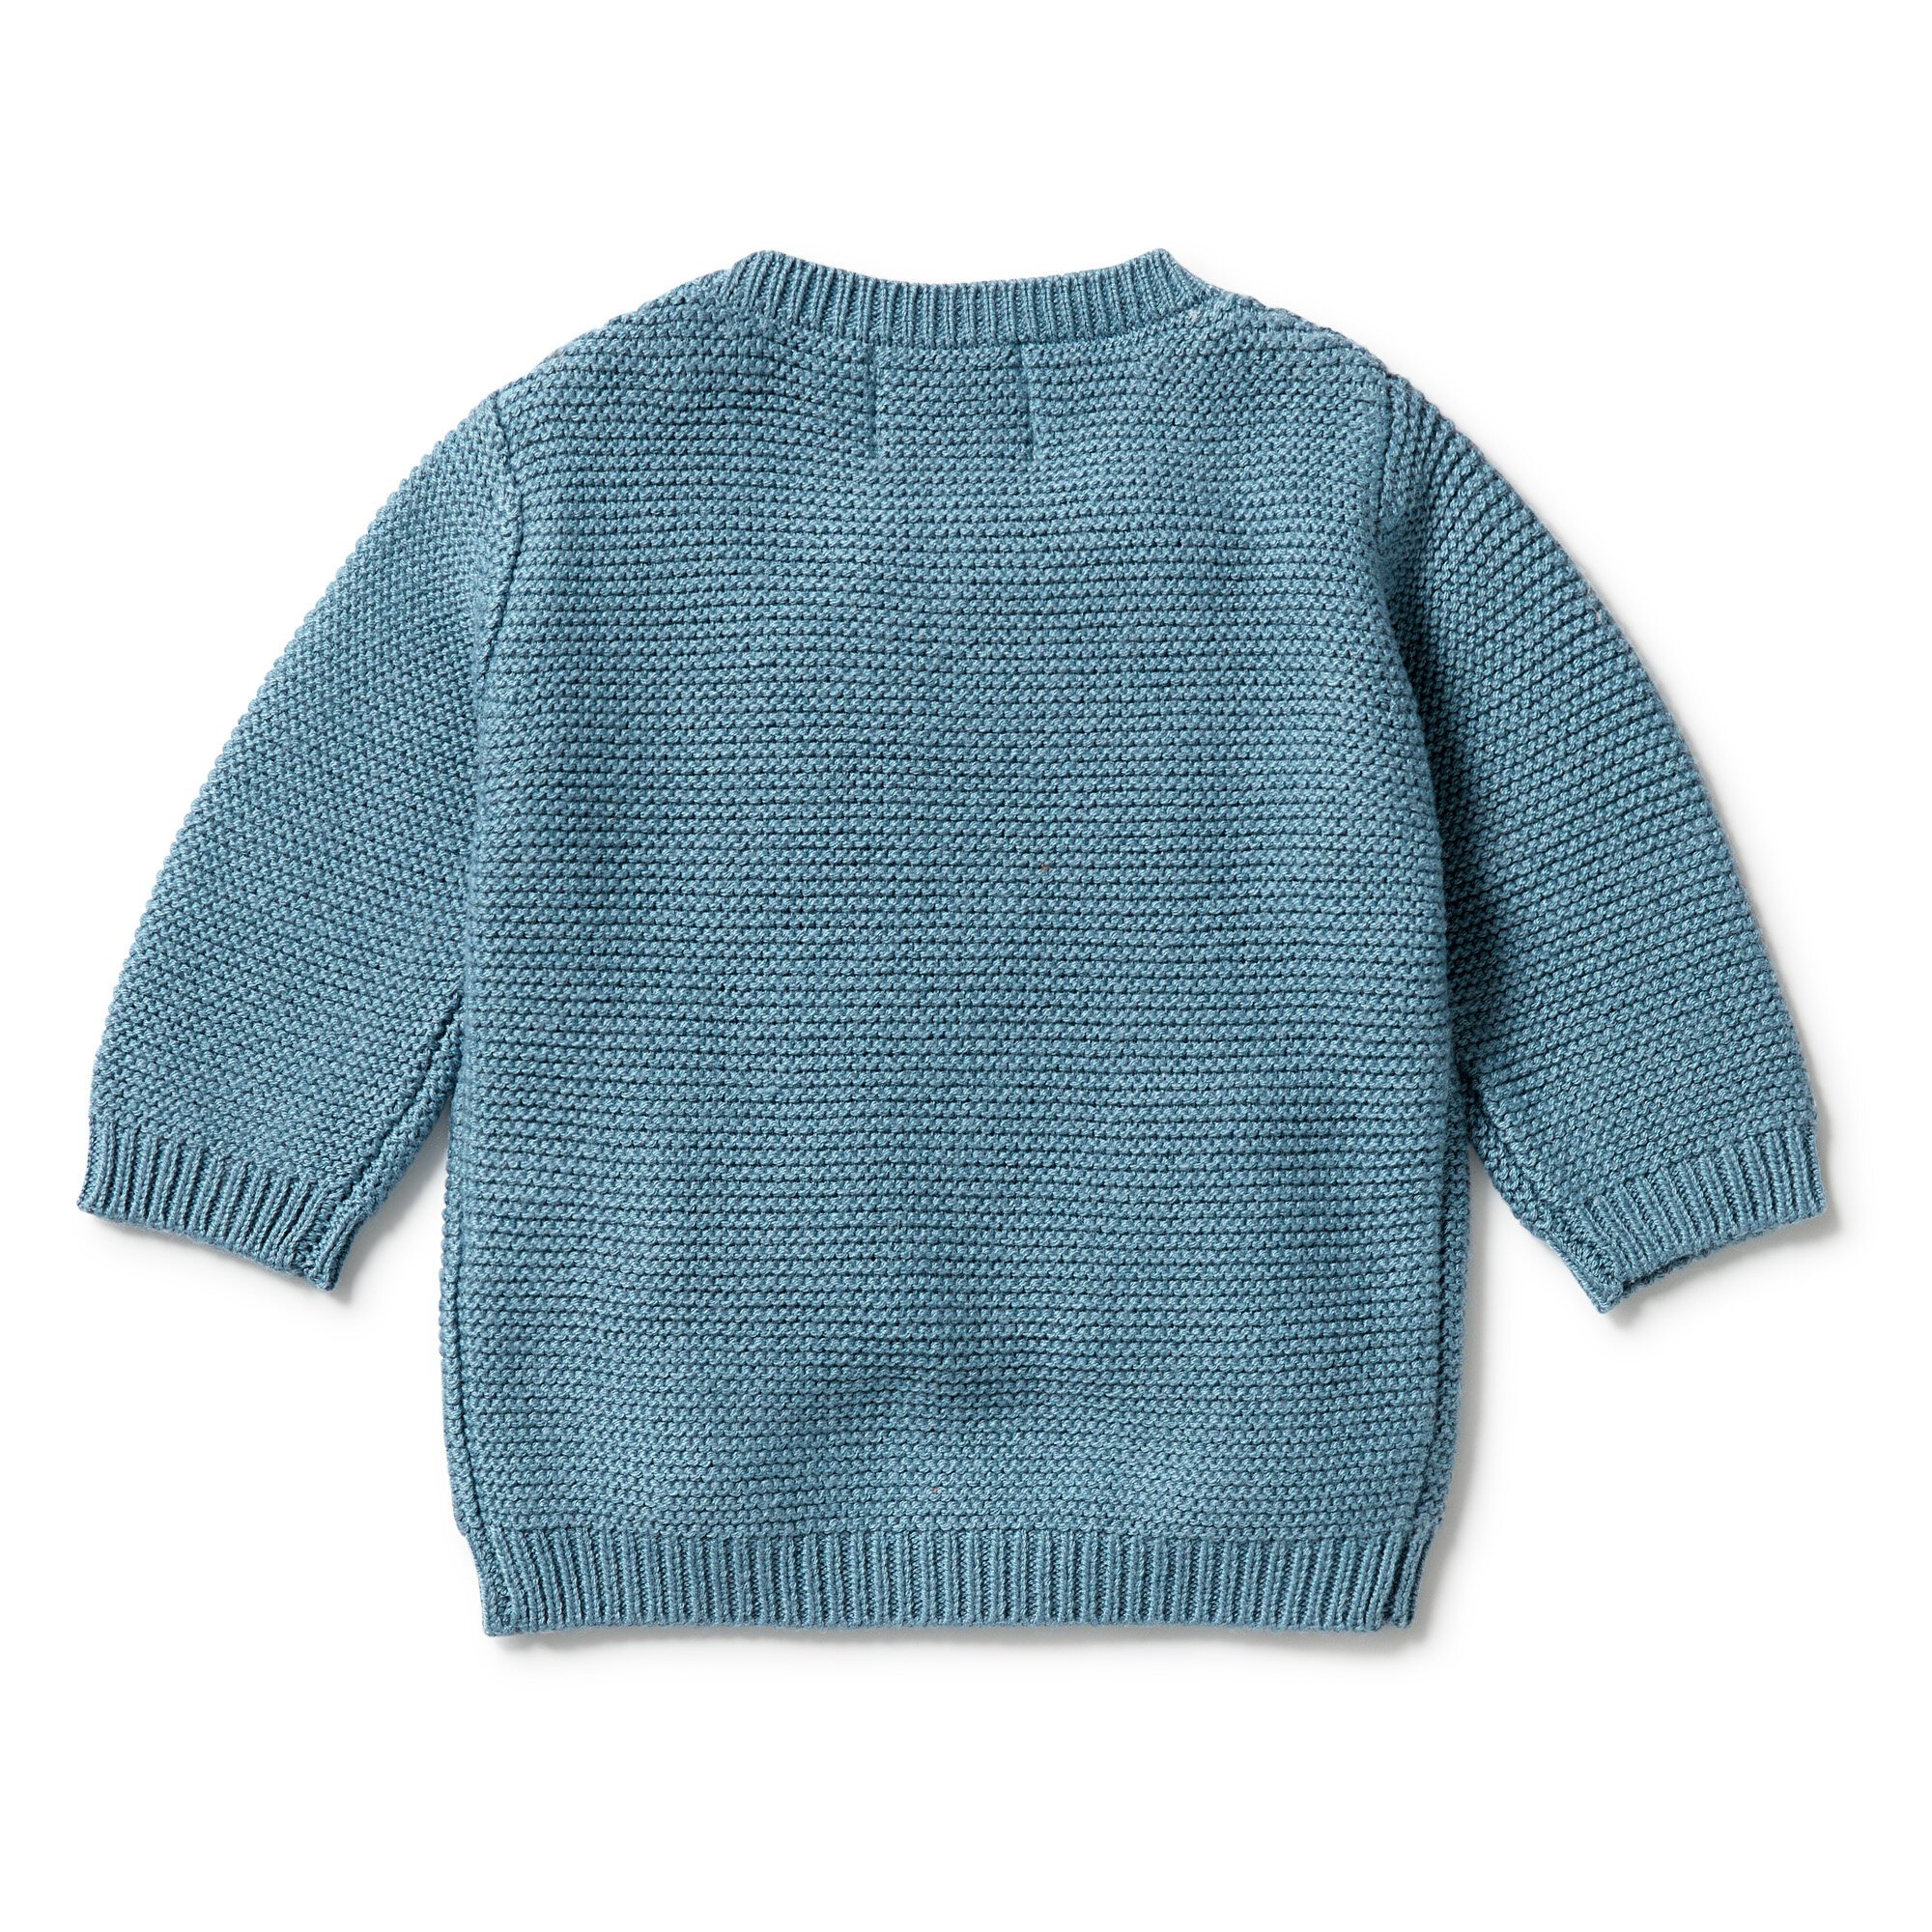 Wilson & Frenchy Cable Knit Jumper - Baby and Newborn Tops | Top Kids ...